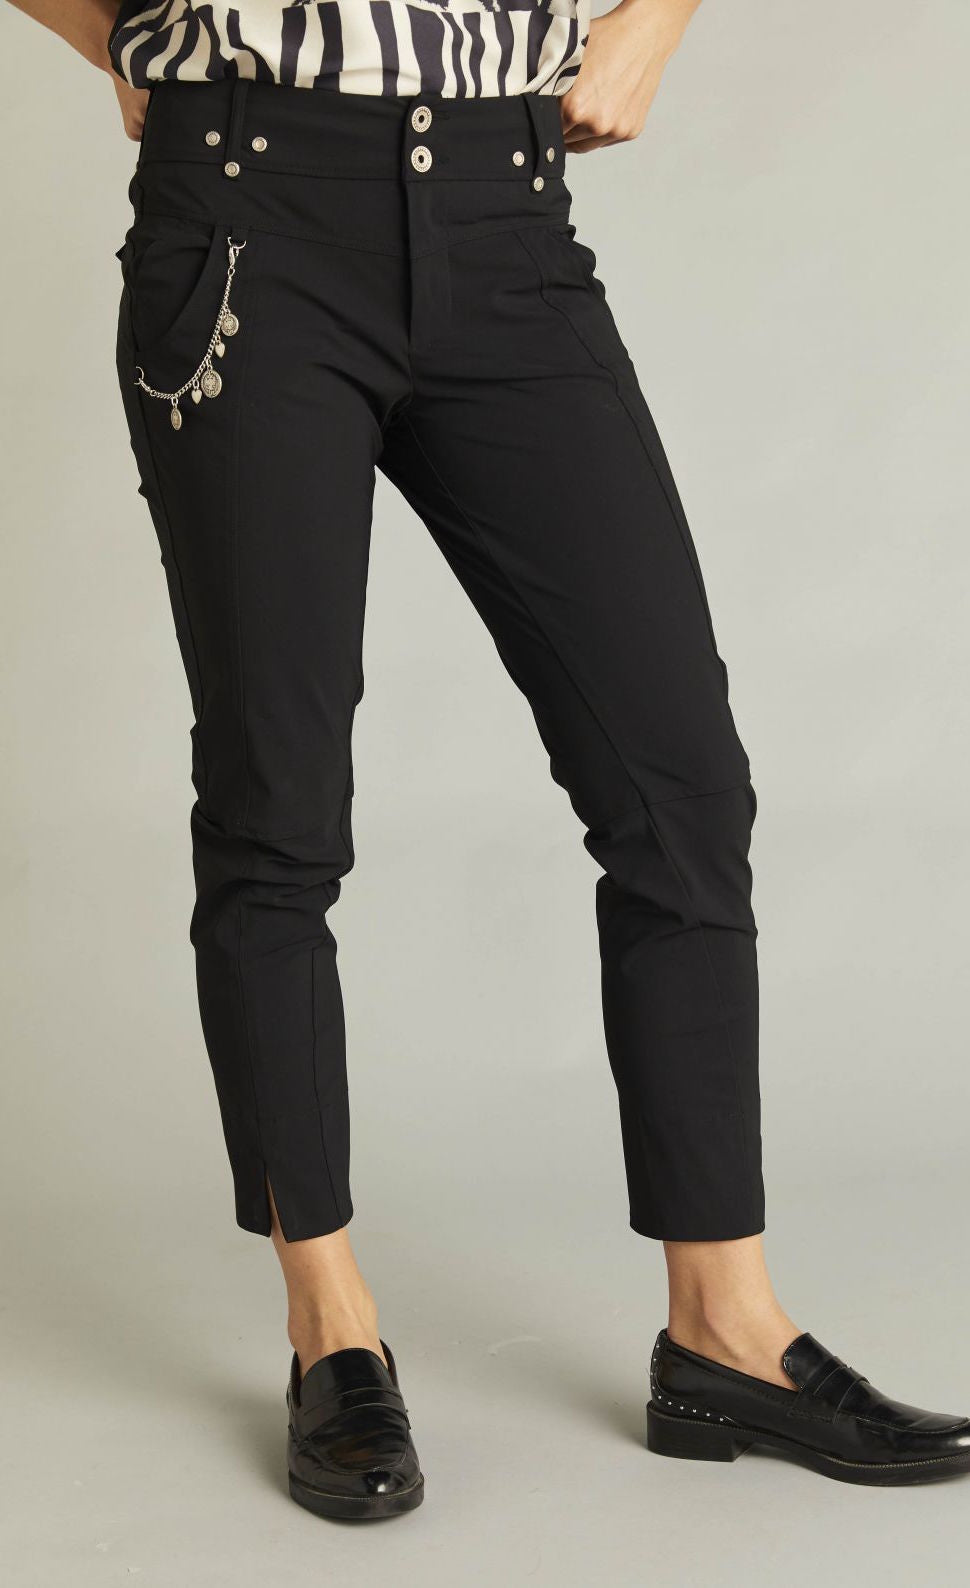 Front bottom half view of a woman wearing a black top and the black indies epatant pants. These pants have two front patch pockets and a side chain on the right side. The pants are slightly cropped and sit above the ankles.